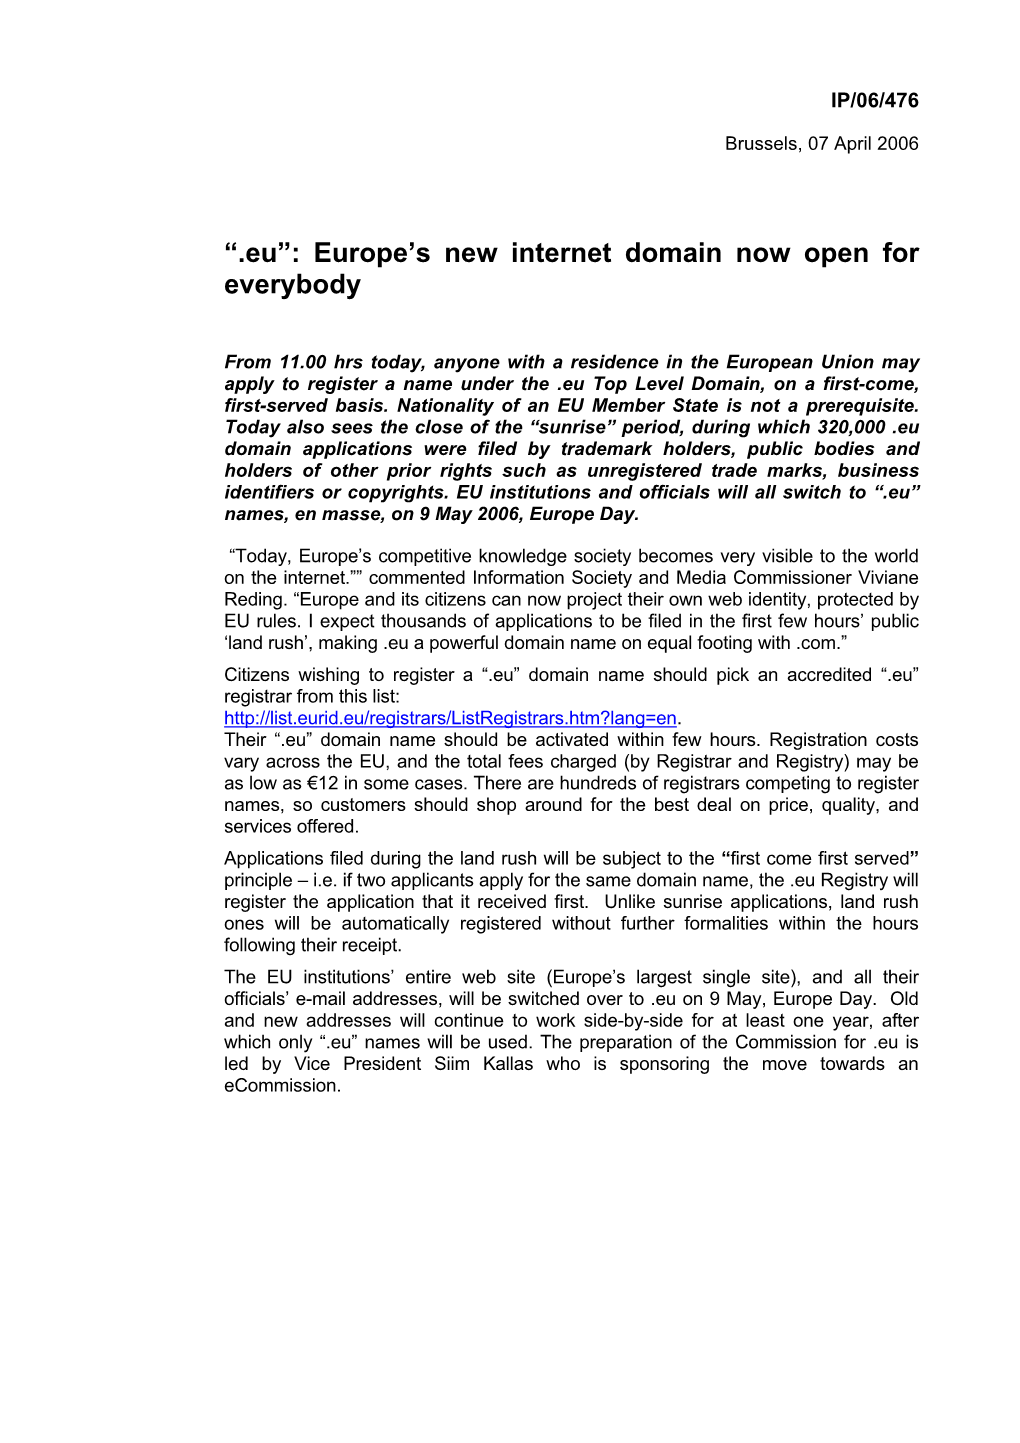 “.Eu”: Europe's New Internet Domain Now Open for Everybody